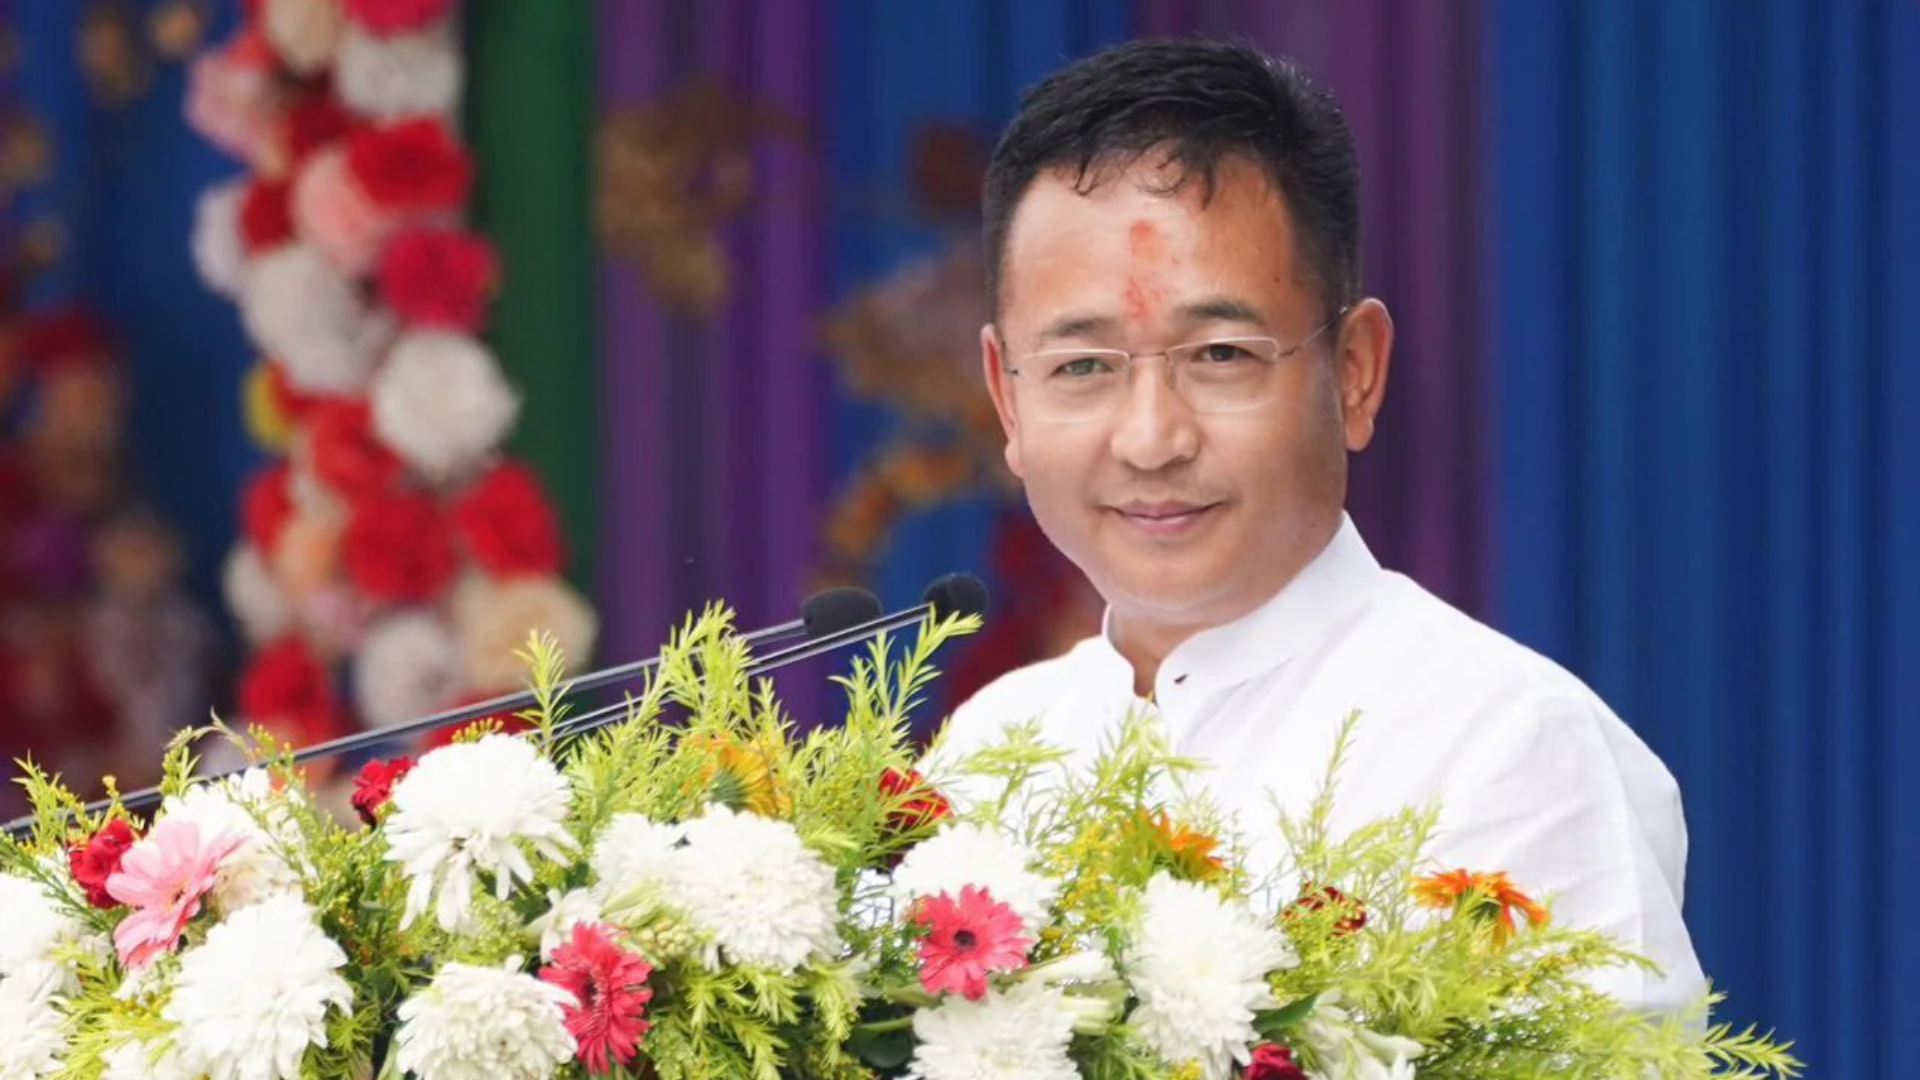 Sikkim Chief Minister PS Tamang Scheduled To Swear-In On June 10